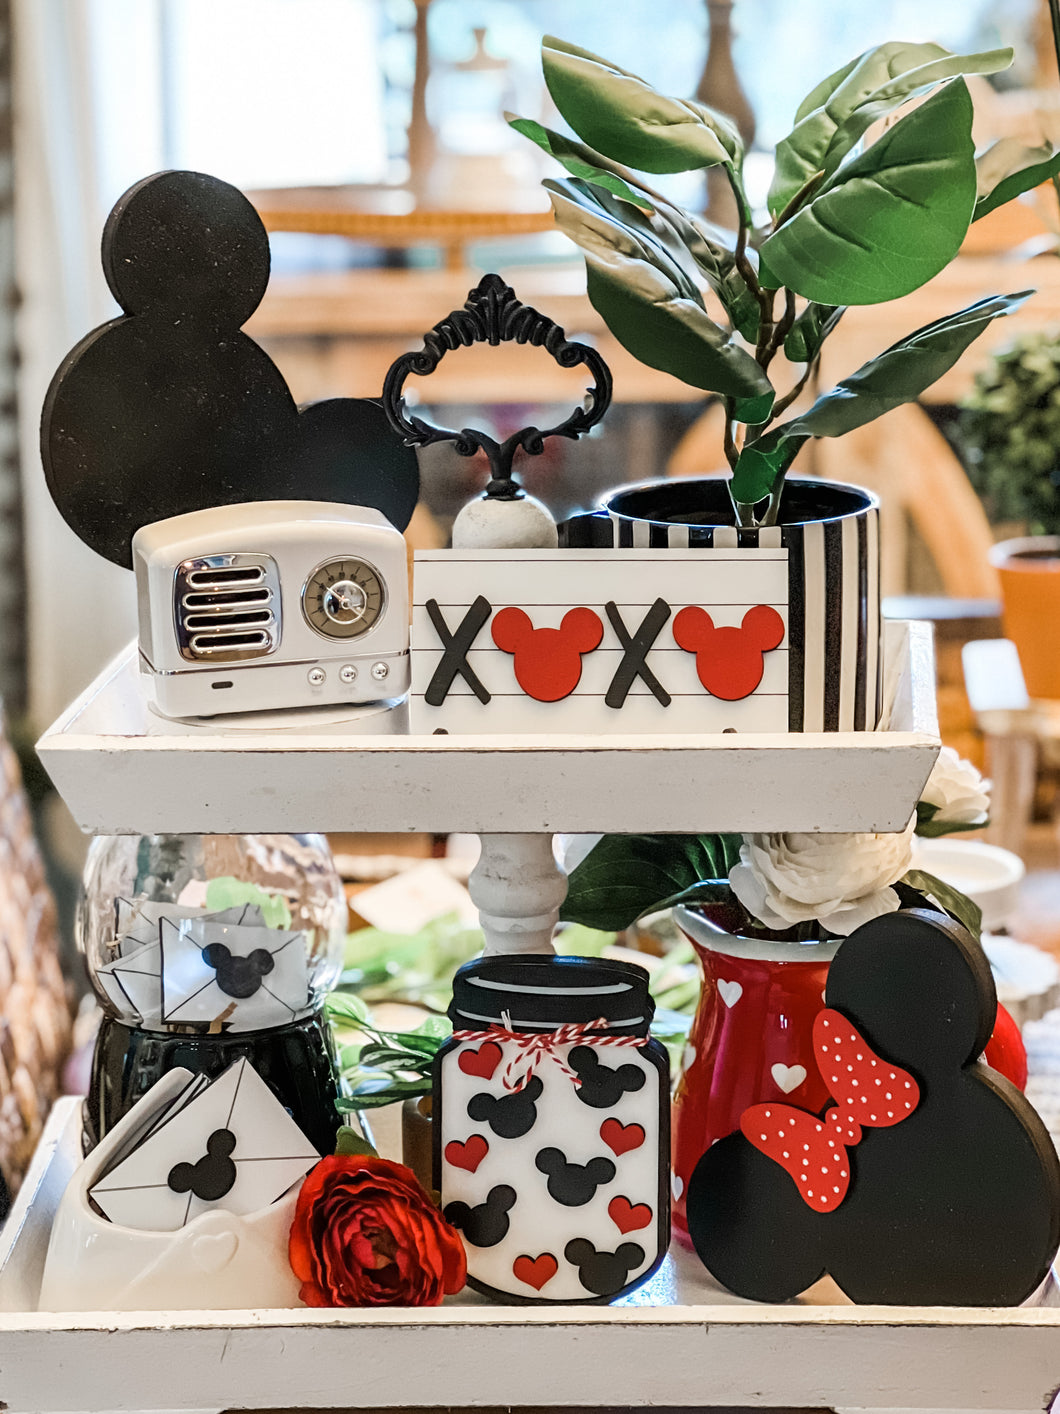 Disney Inspired Valentine's Tiered Tray Items & Mini Love Letters